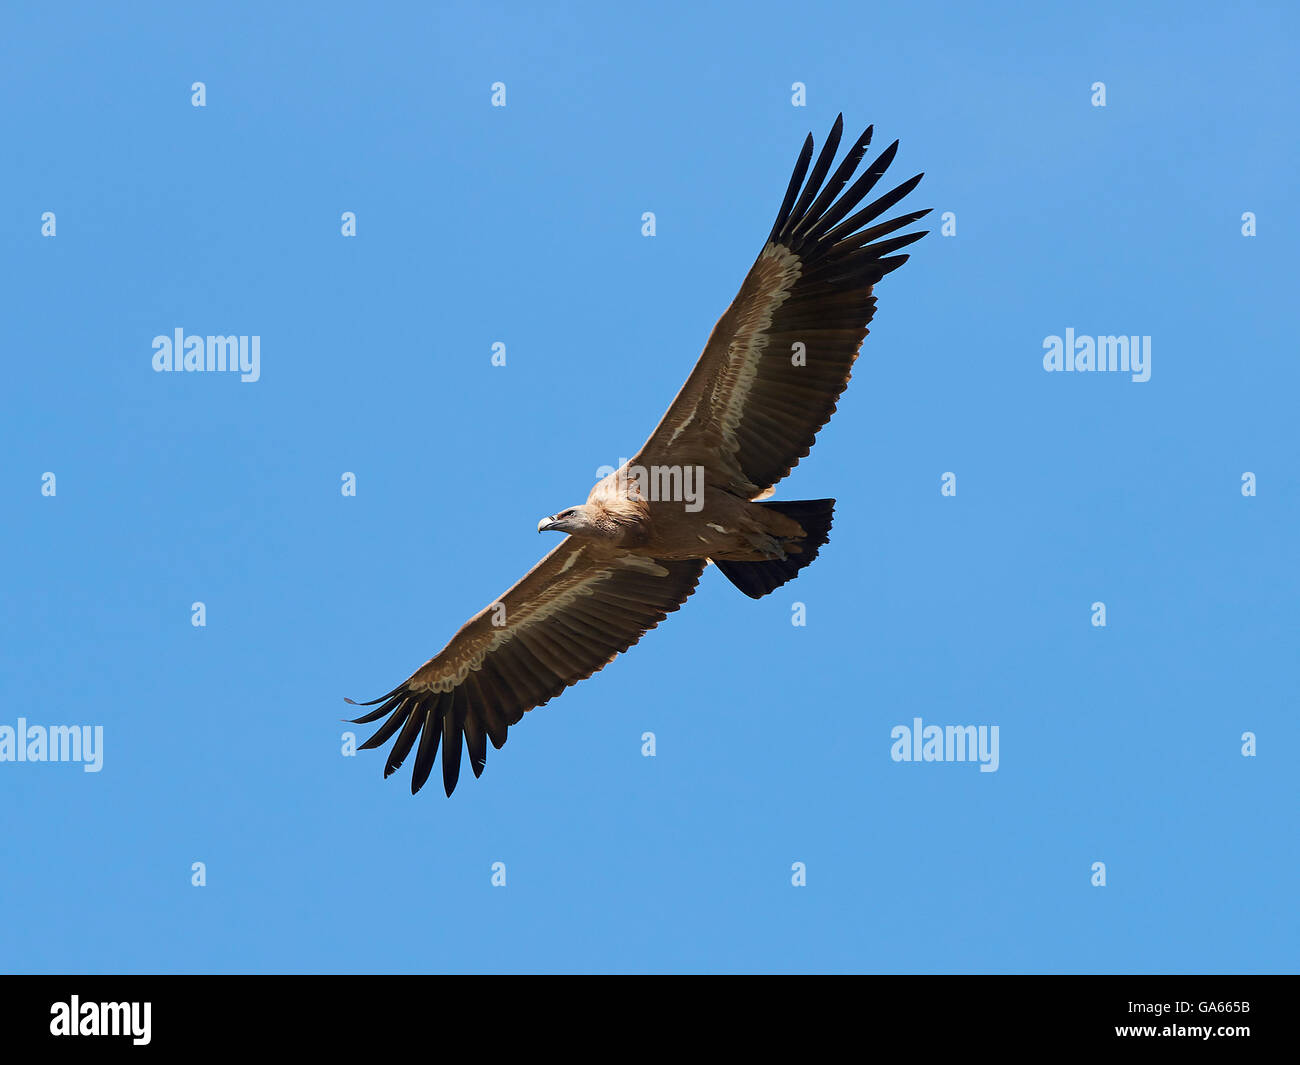 Griffon vulture in flight with blue skies in the background Stock Photo